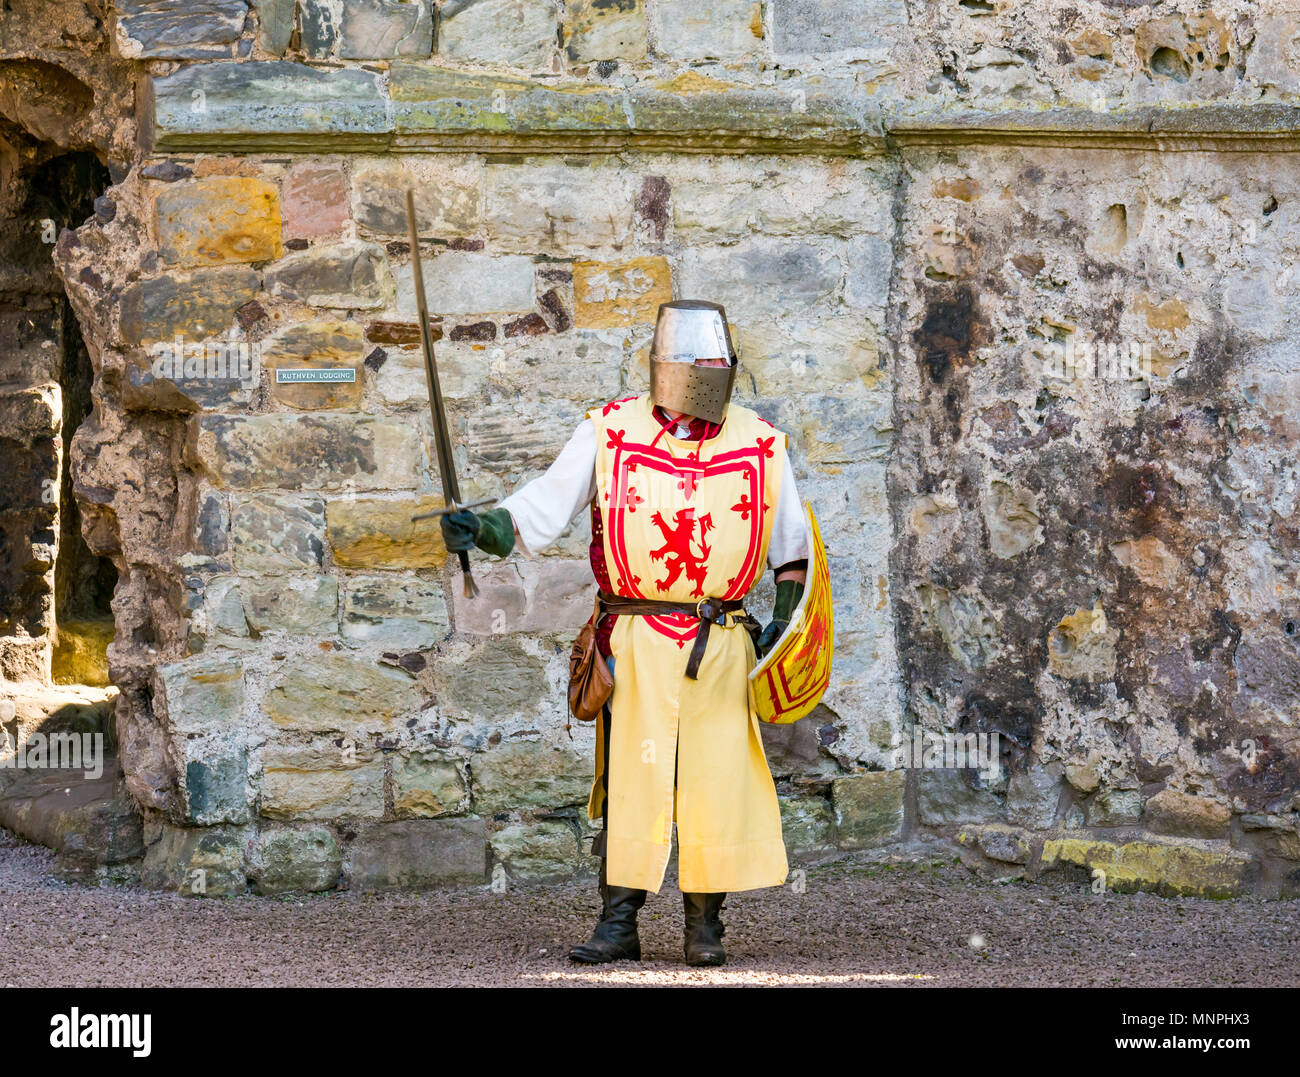 Dirleton, East Lothian, Scotland, UK, 19th May 2018.  Dirleton, East Lothian, Scotland, UK, 19th May 2018.  Dirleton Castle attack re-enactment. The Historic Saltire Society staging a tongue-in-cheek re-enactment of an attack by Robert the Bruce, King of Scotland, around 1311, to take the castle from the English, dressed in authentic clothes and armour and wielding replica weapons in Historic Environment Scotland's Dirleton Castle. A man playing Robert the Bruce dressed in costume with a lion rampant, great helm and sword raised Stock Photo